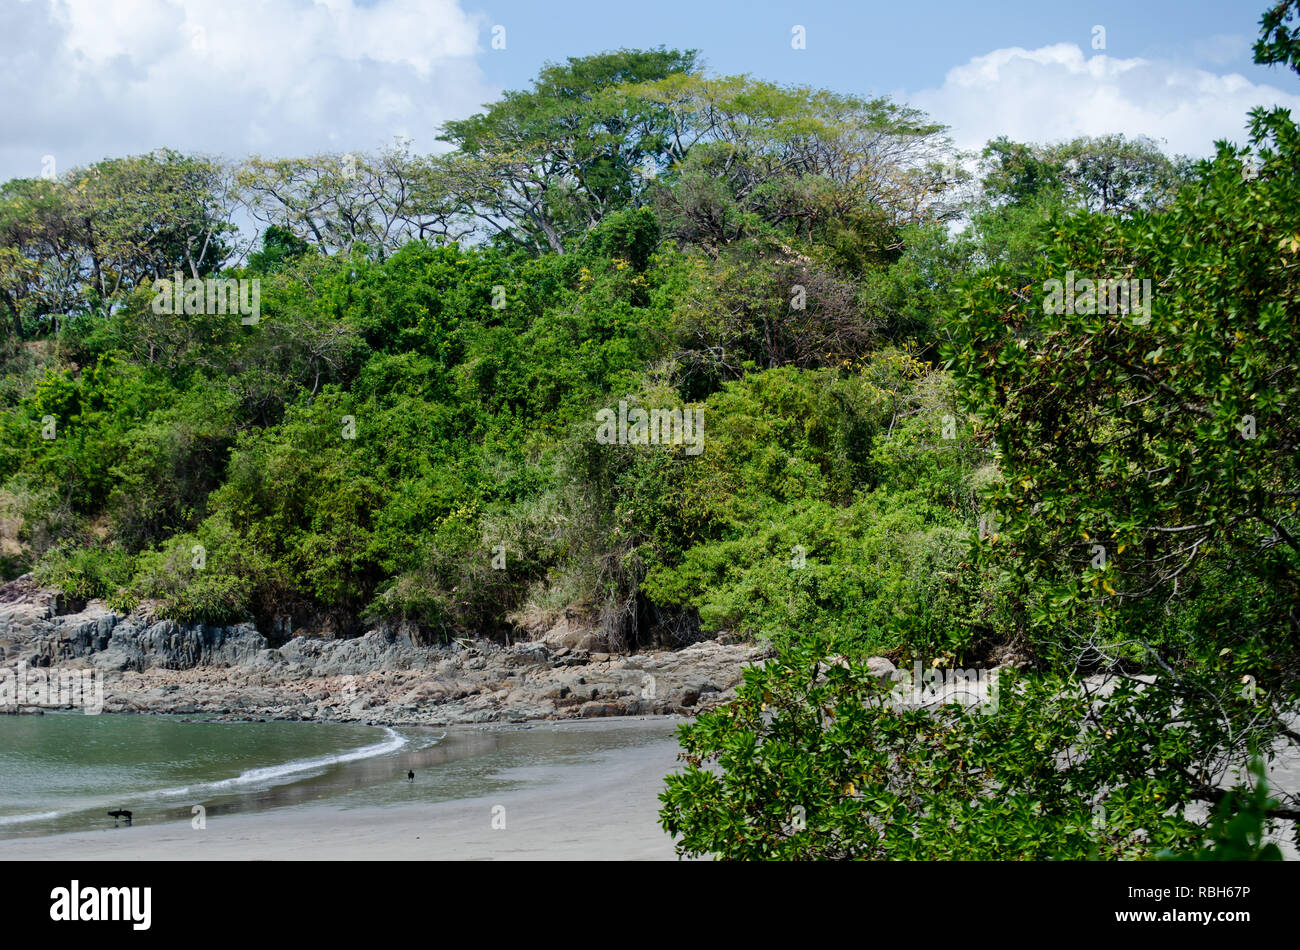 Tropical Dry Forest landscape Stock Photo